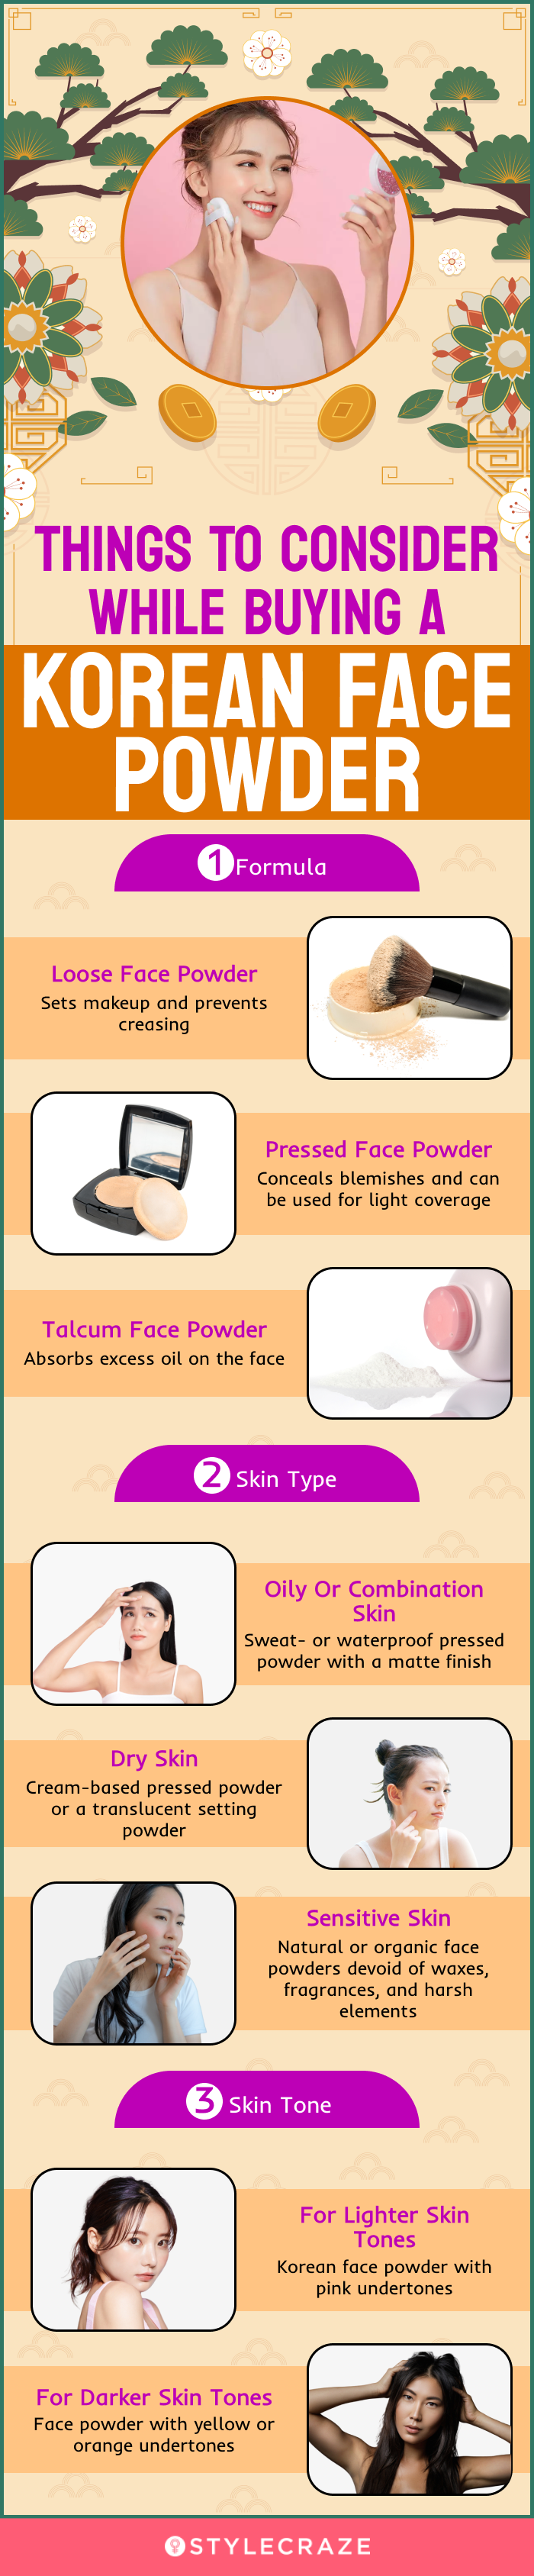 Things To Consider While Buying A Korean Face Powder (infographic)